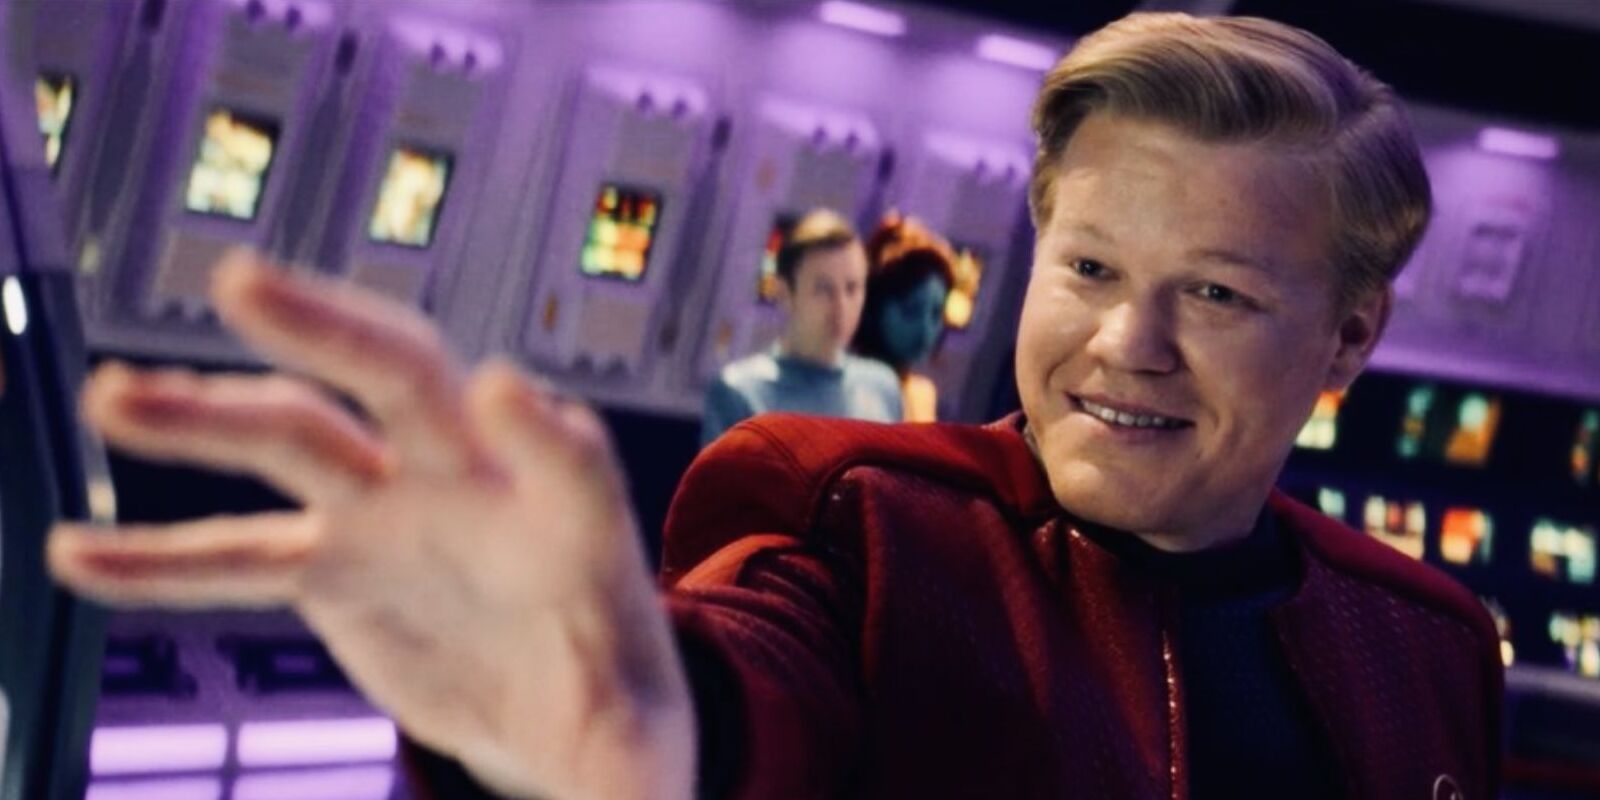 Jesse Plemons as Daly with his arm out while sitting in the captain's car in Black Mirror's USS Callister